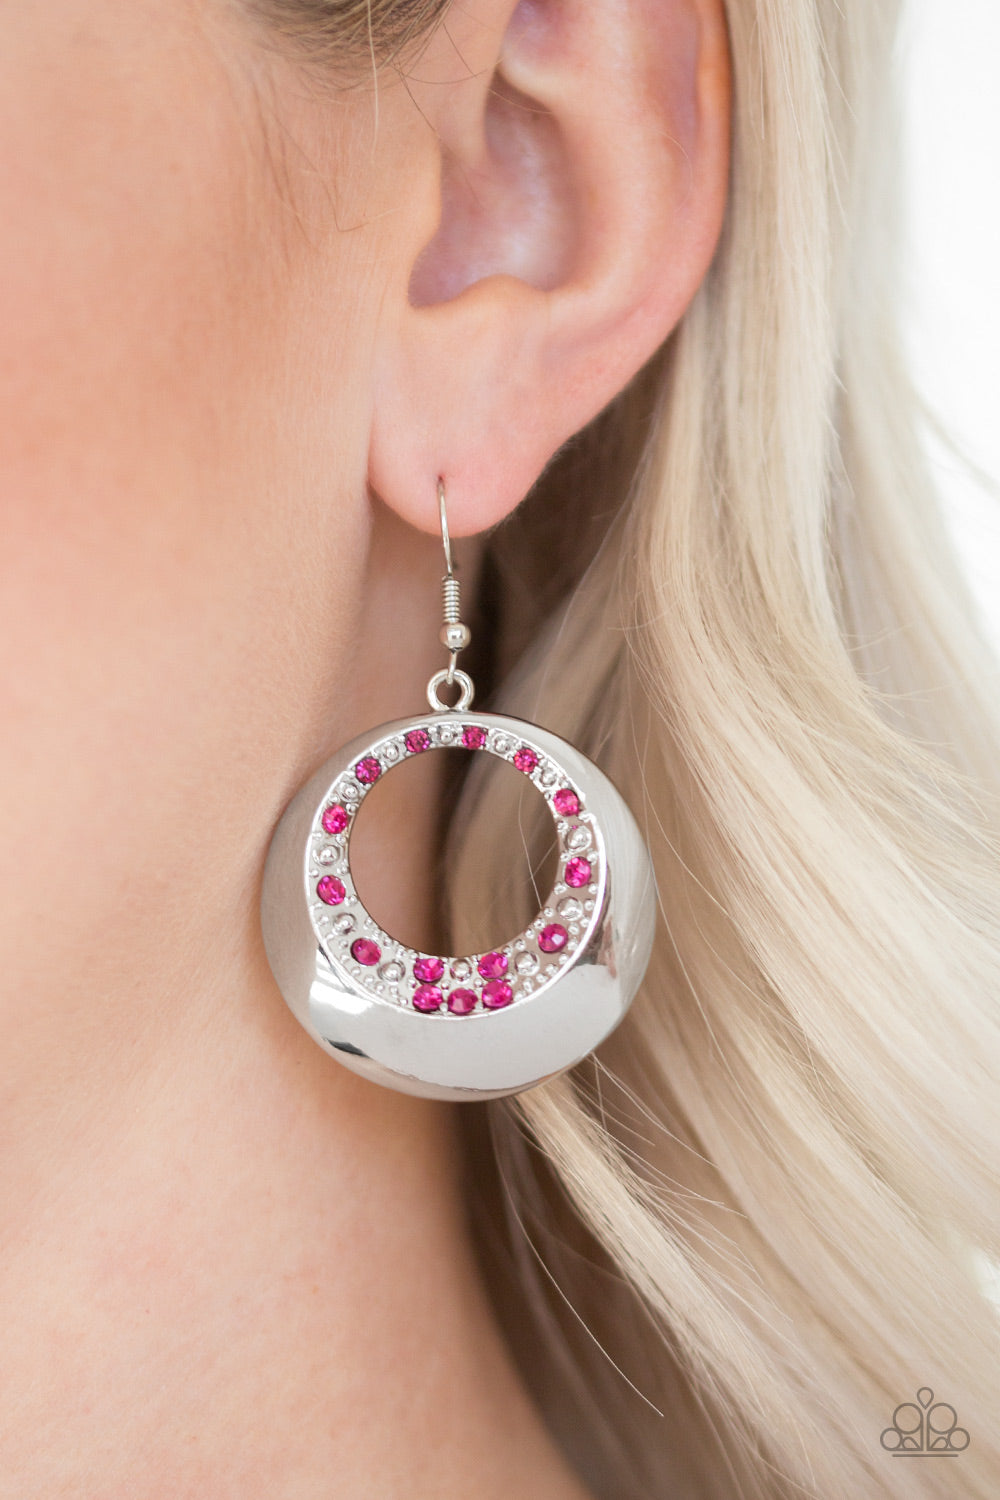 Ringed In Refinement- Pink and Silver Earrings- Paparazzi Accessories